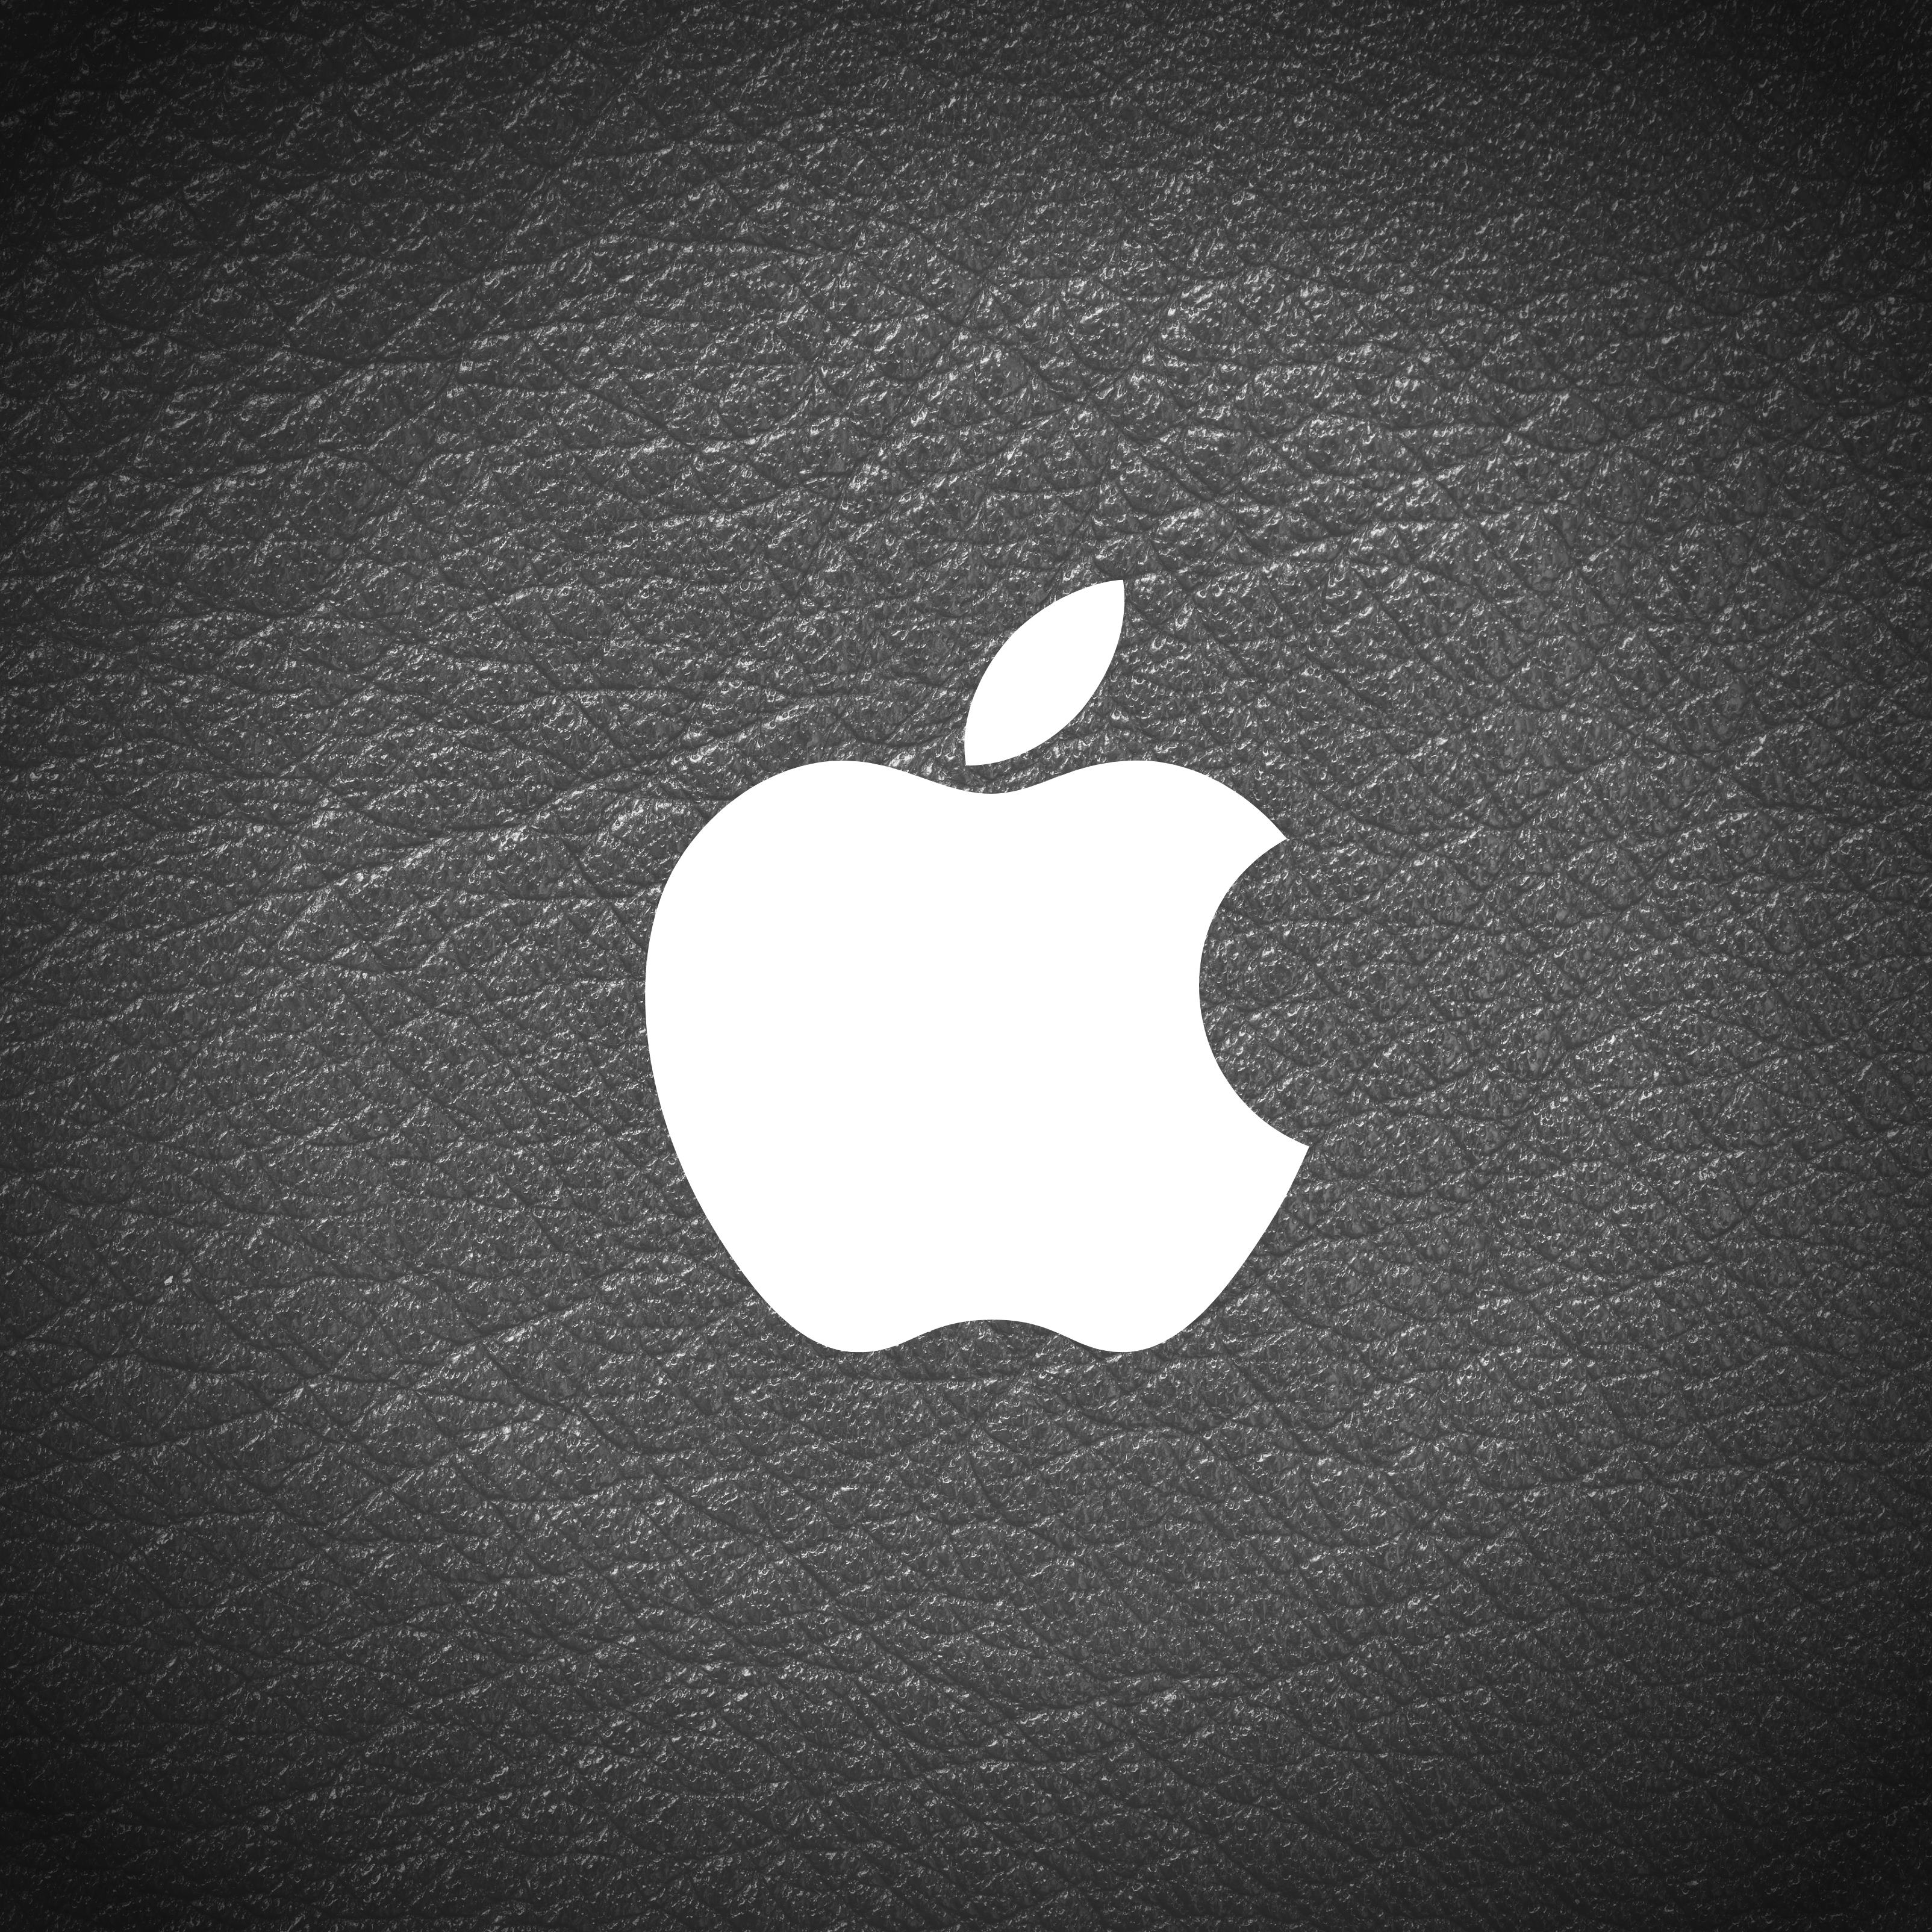 Apple iPad Pro wallpapers Apple Logo Leather Black and White iPad Wallpaper